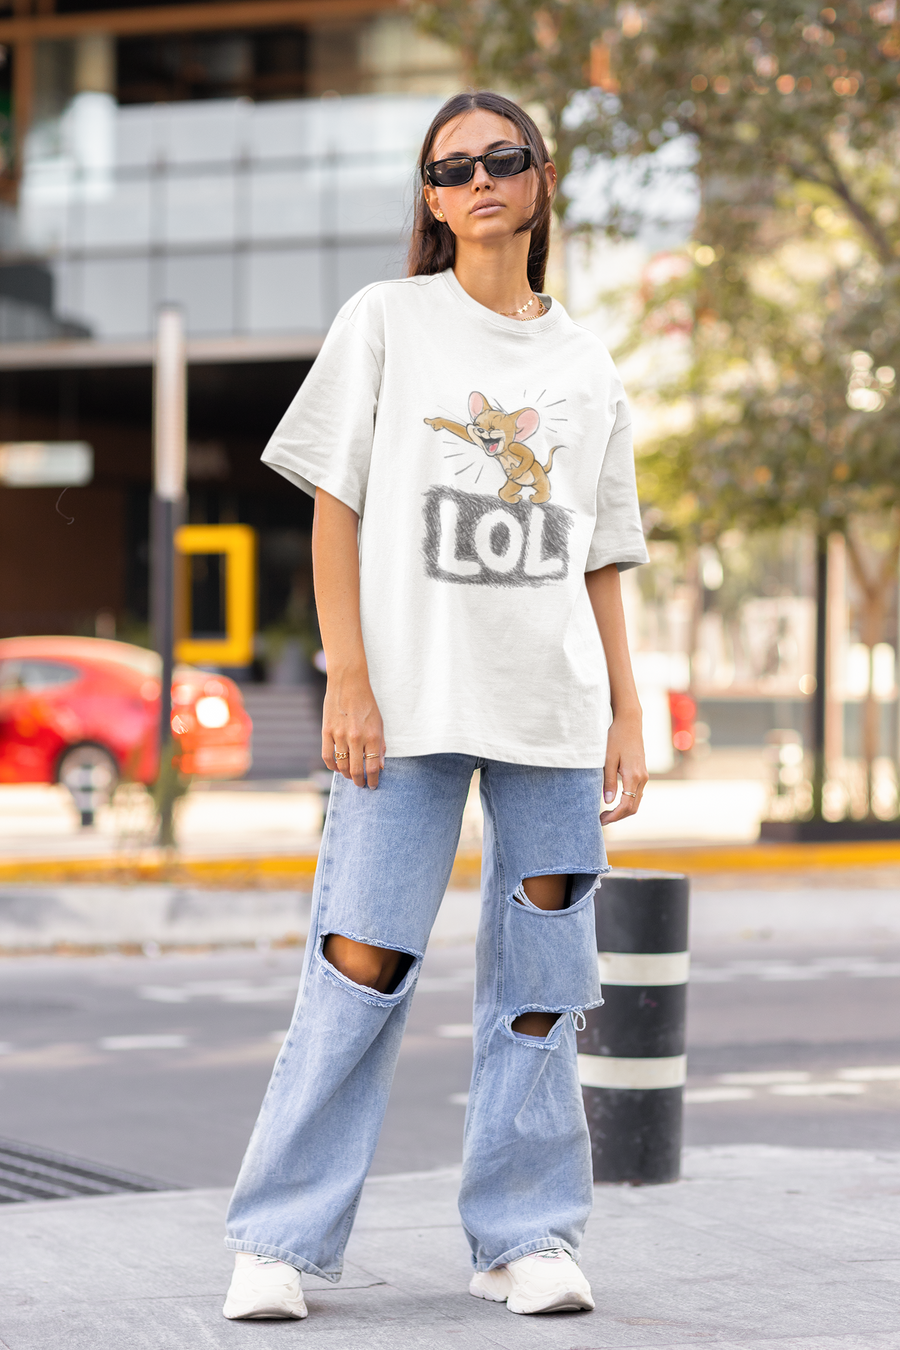 Official Tom & Jerry - LOL Oversized T-Shirt